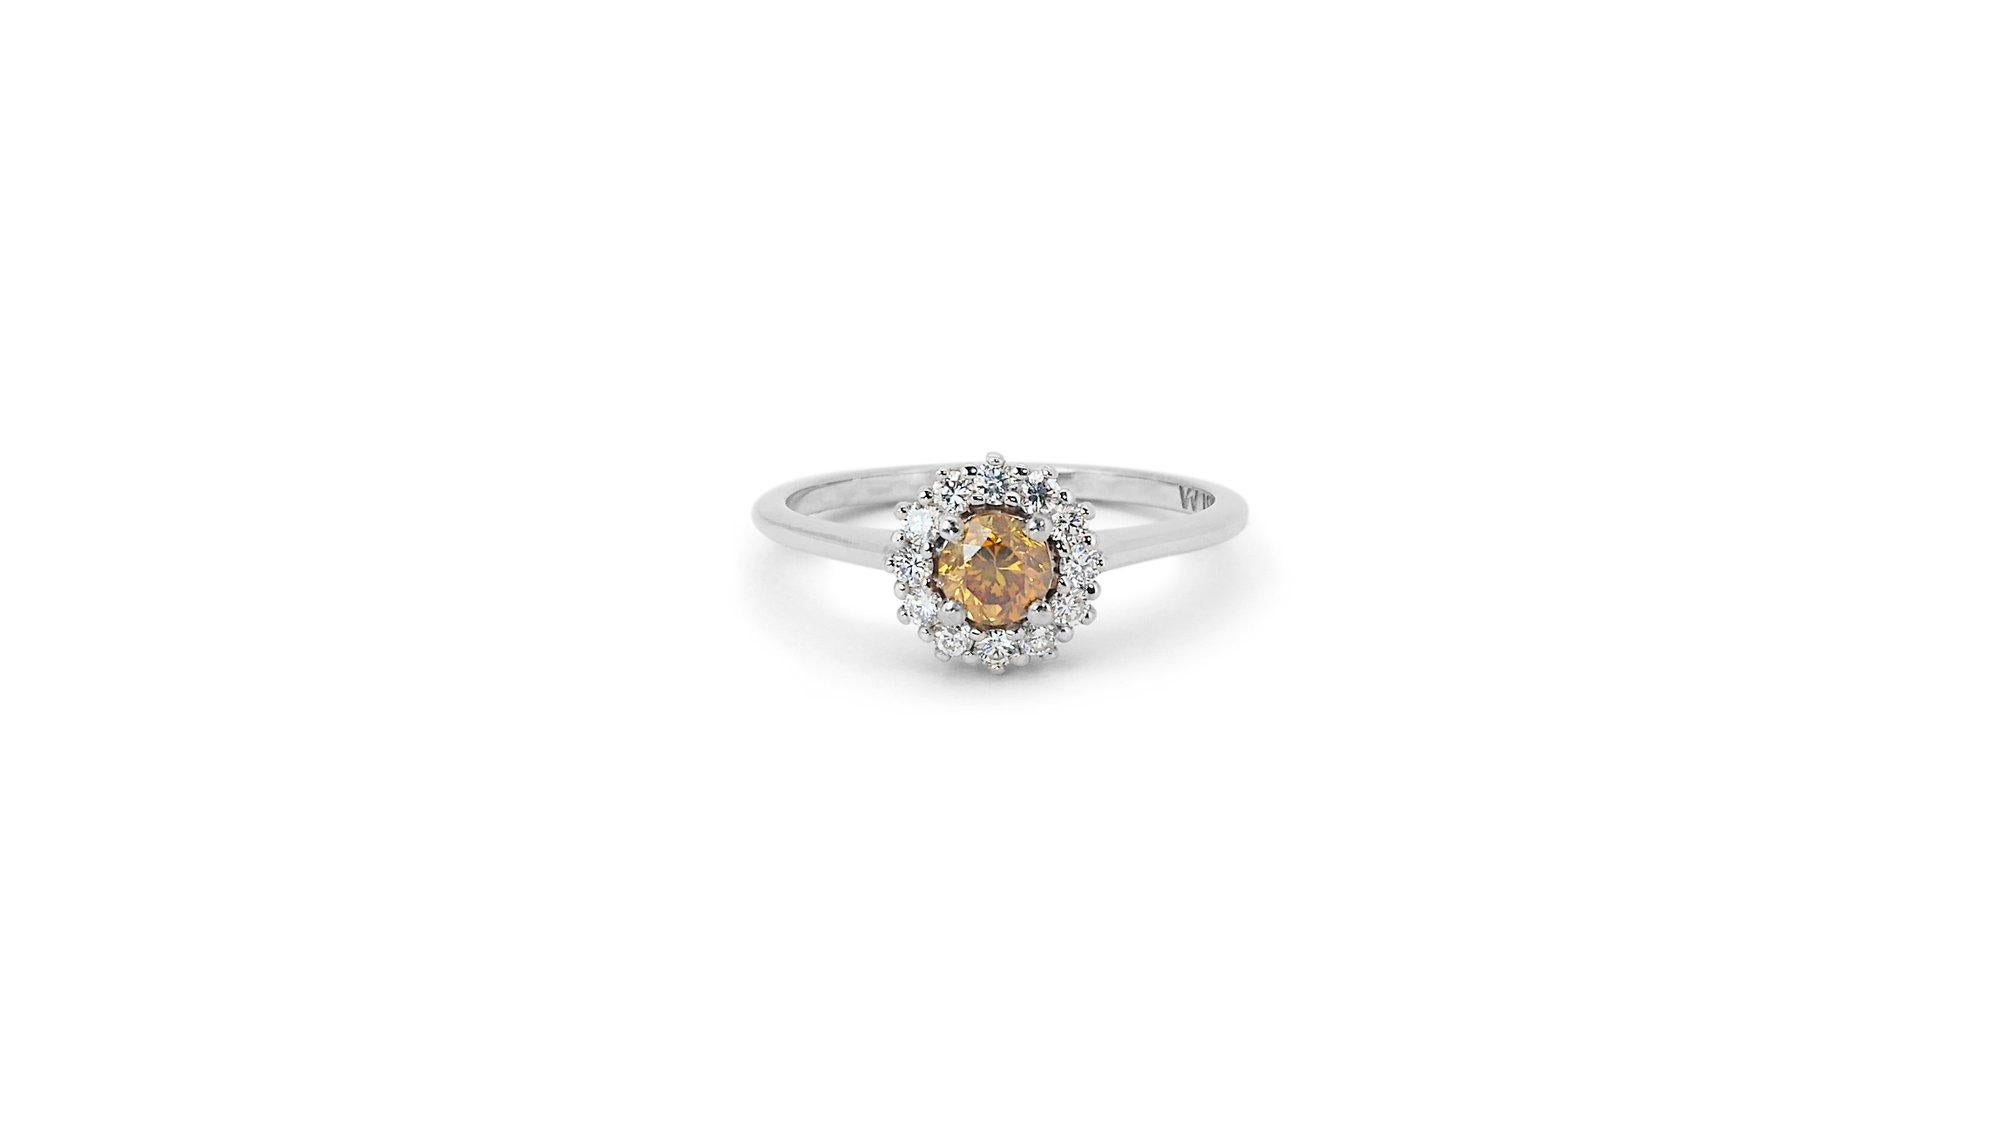 A gorgeous Halo Ring with a dazzling 0.4-carat Round Brilliant natural diamond. It has 0.25 carat of side diamonds which add more to its elegance. The jewelry is made of 18K White with a high-quality polish. It comes with an AIG certificate and a